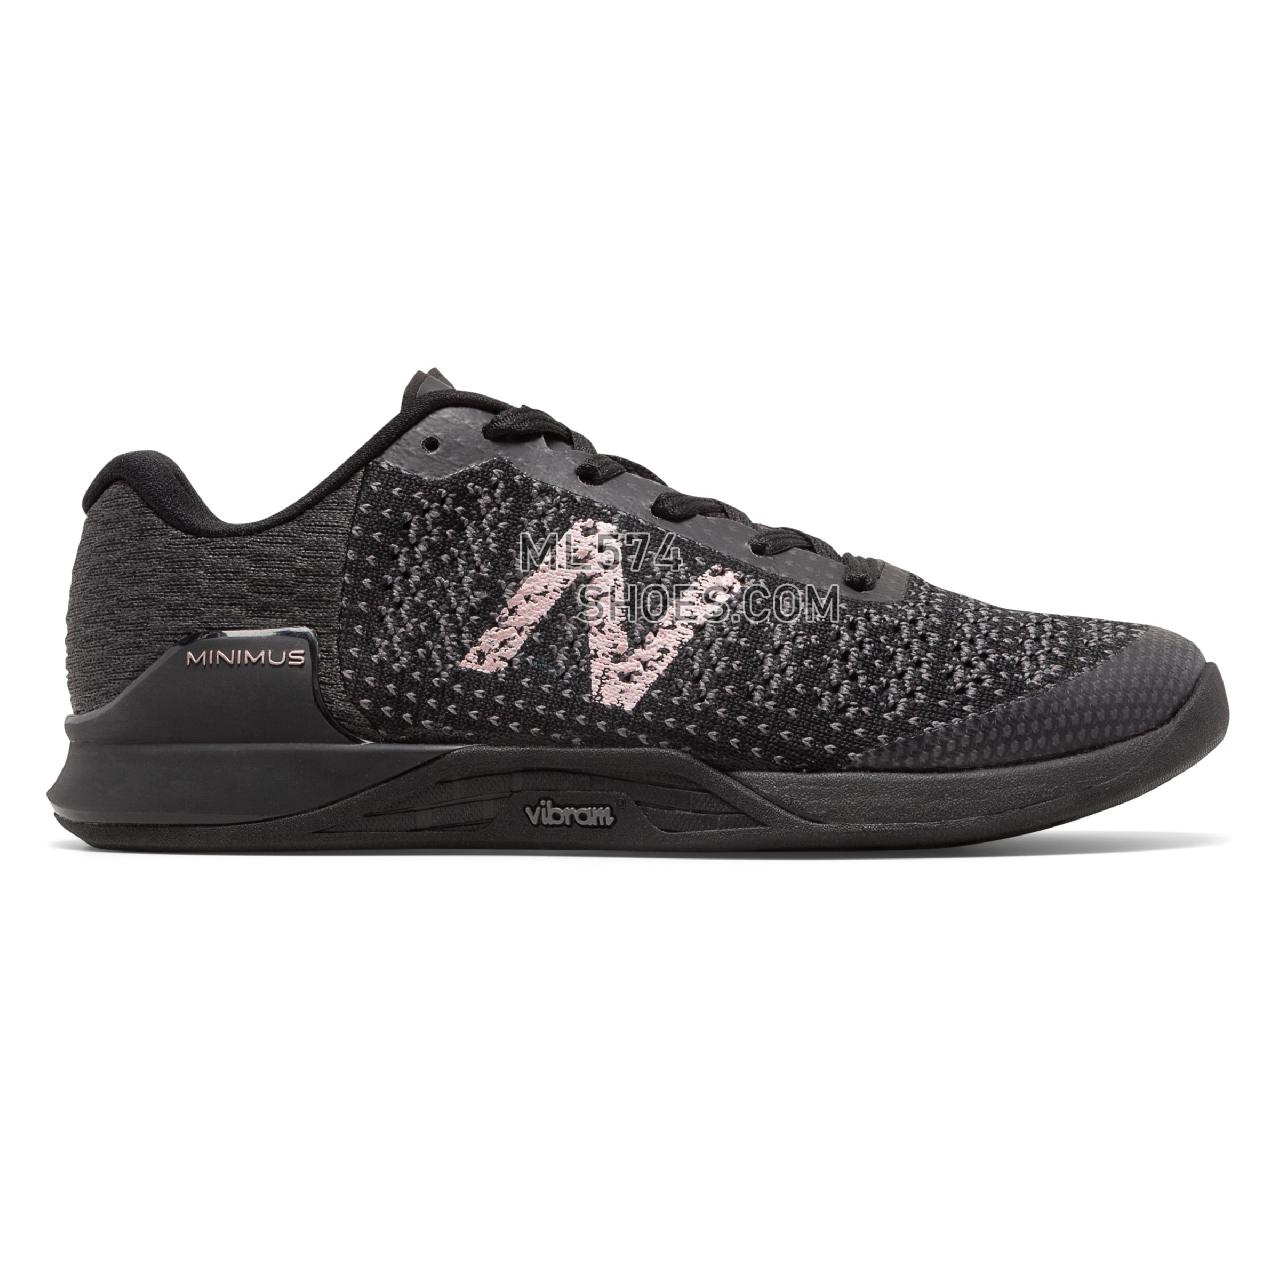 New Balance Minimus Prevail - Women's Workout - Black with Magnet and Champagne Metallic - WXMPLB1